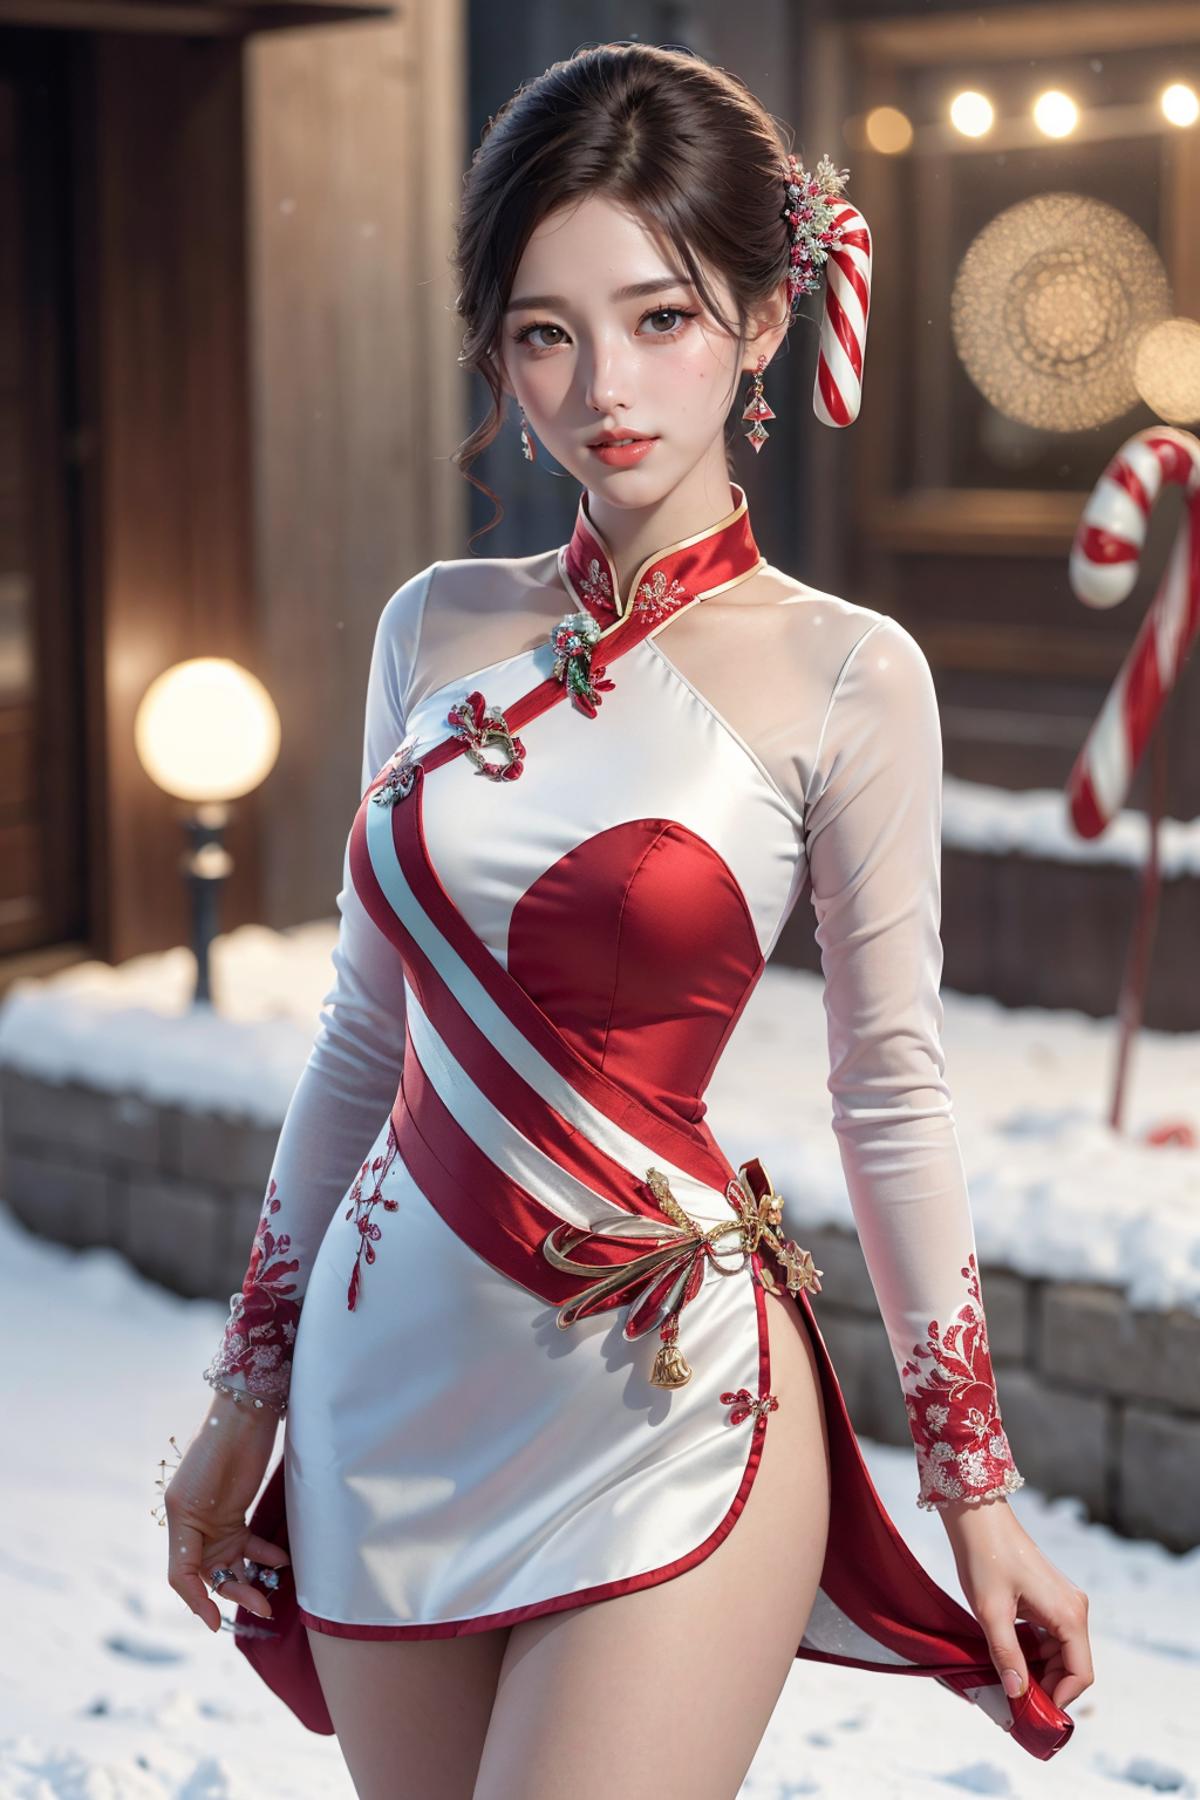 Candy Cane Cocktail | a Christmas inspired dress image by Darknoice